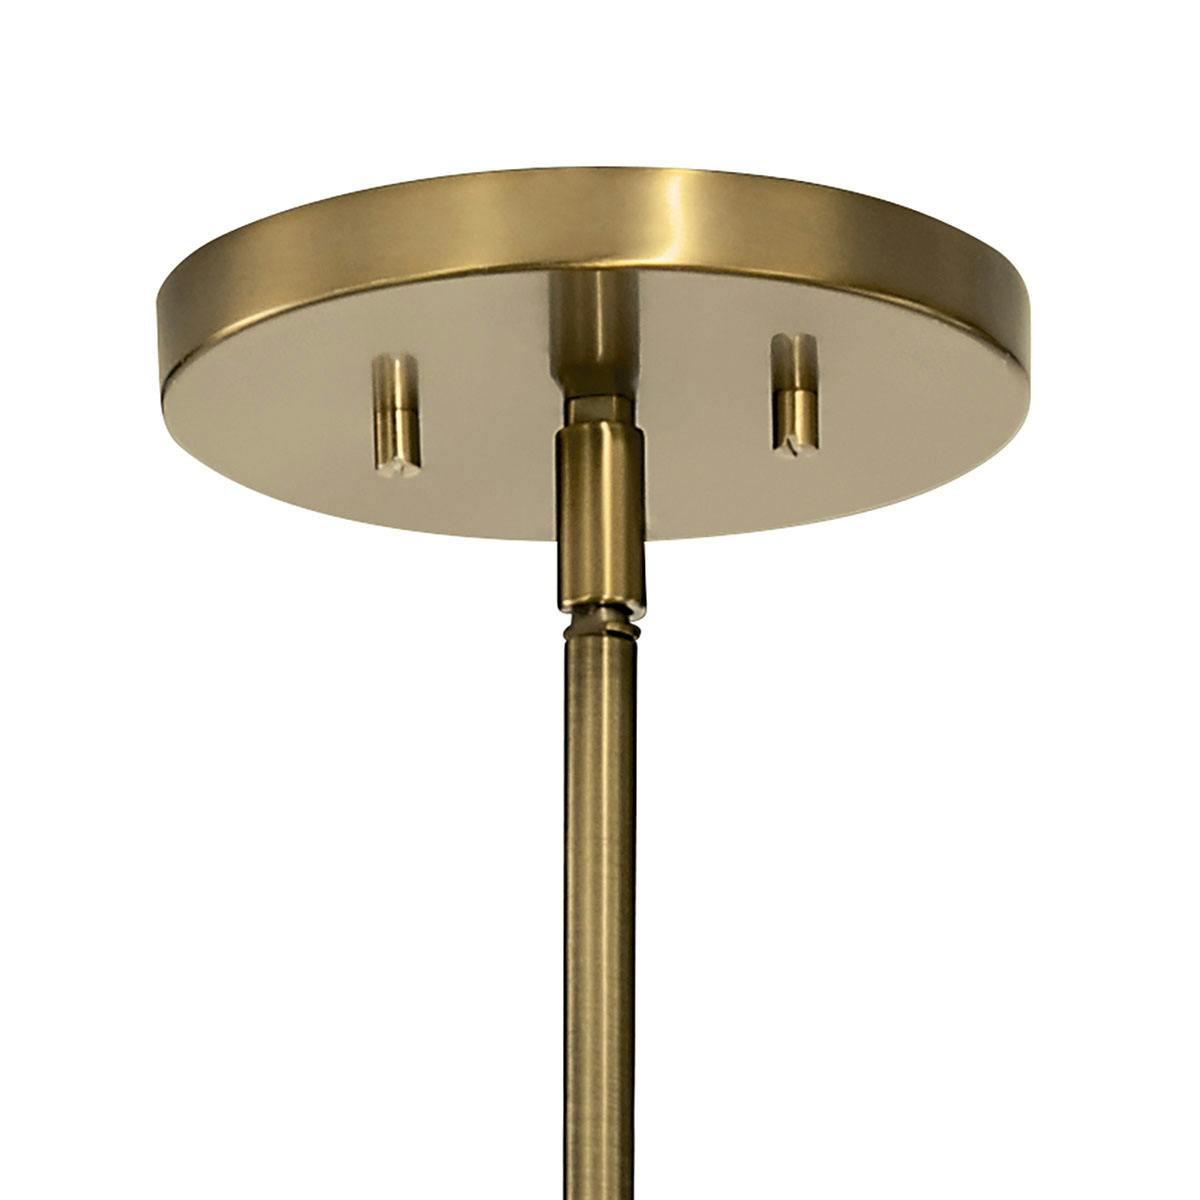 Canopy for the Tolani 12 Light Chandelier Brass on a white background